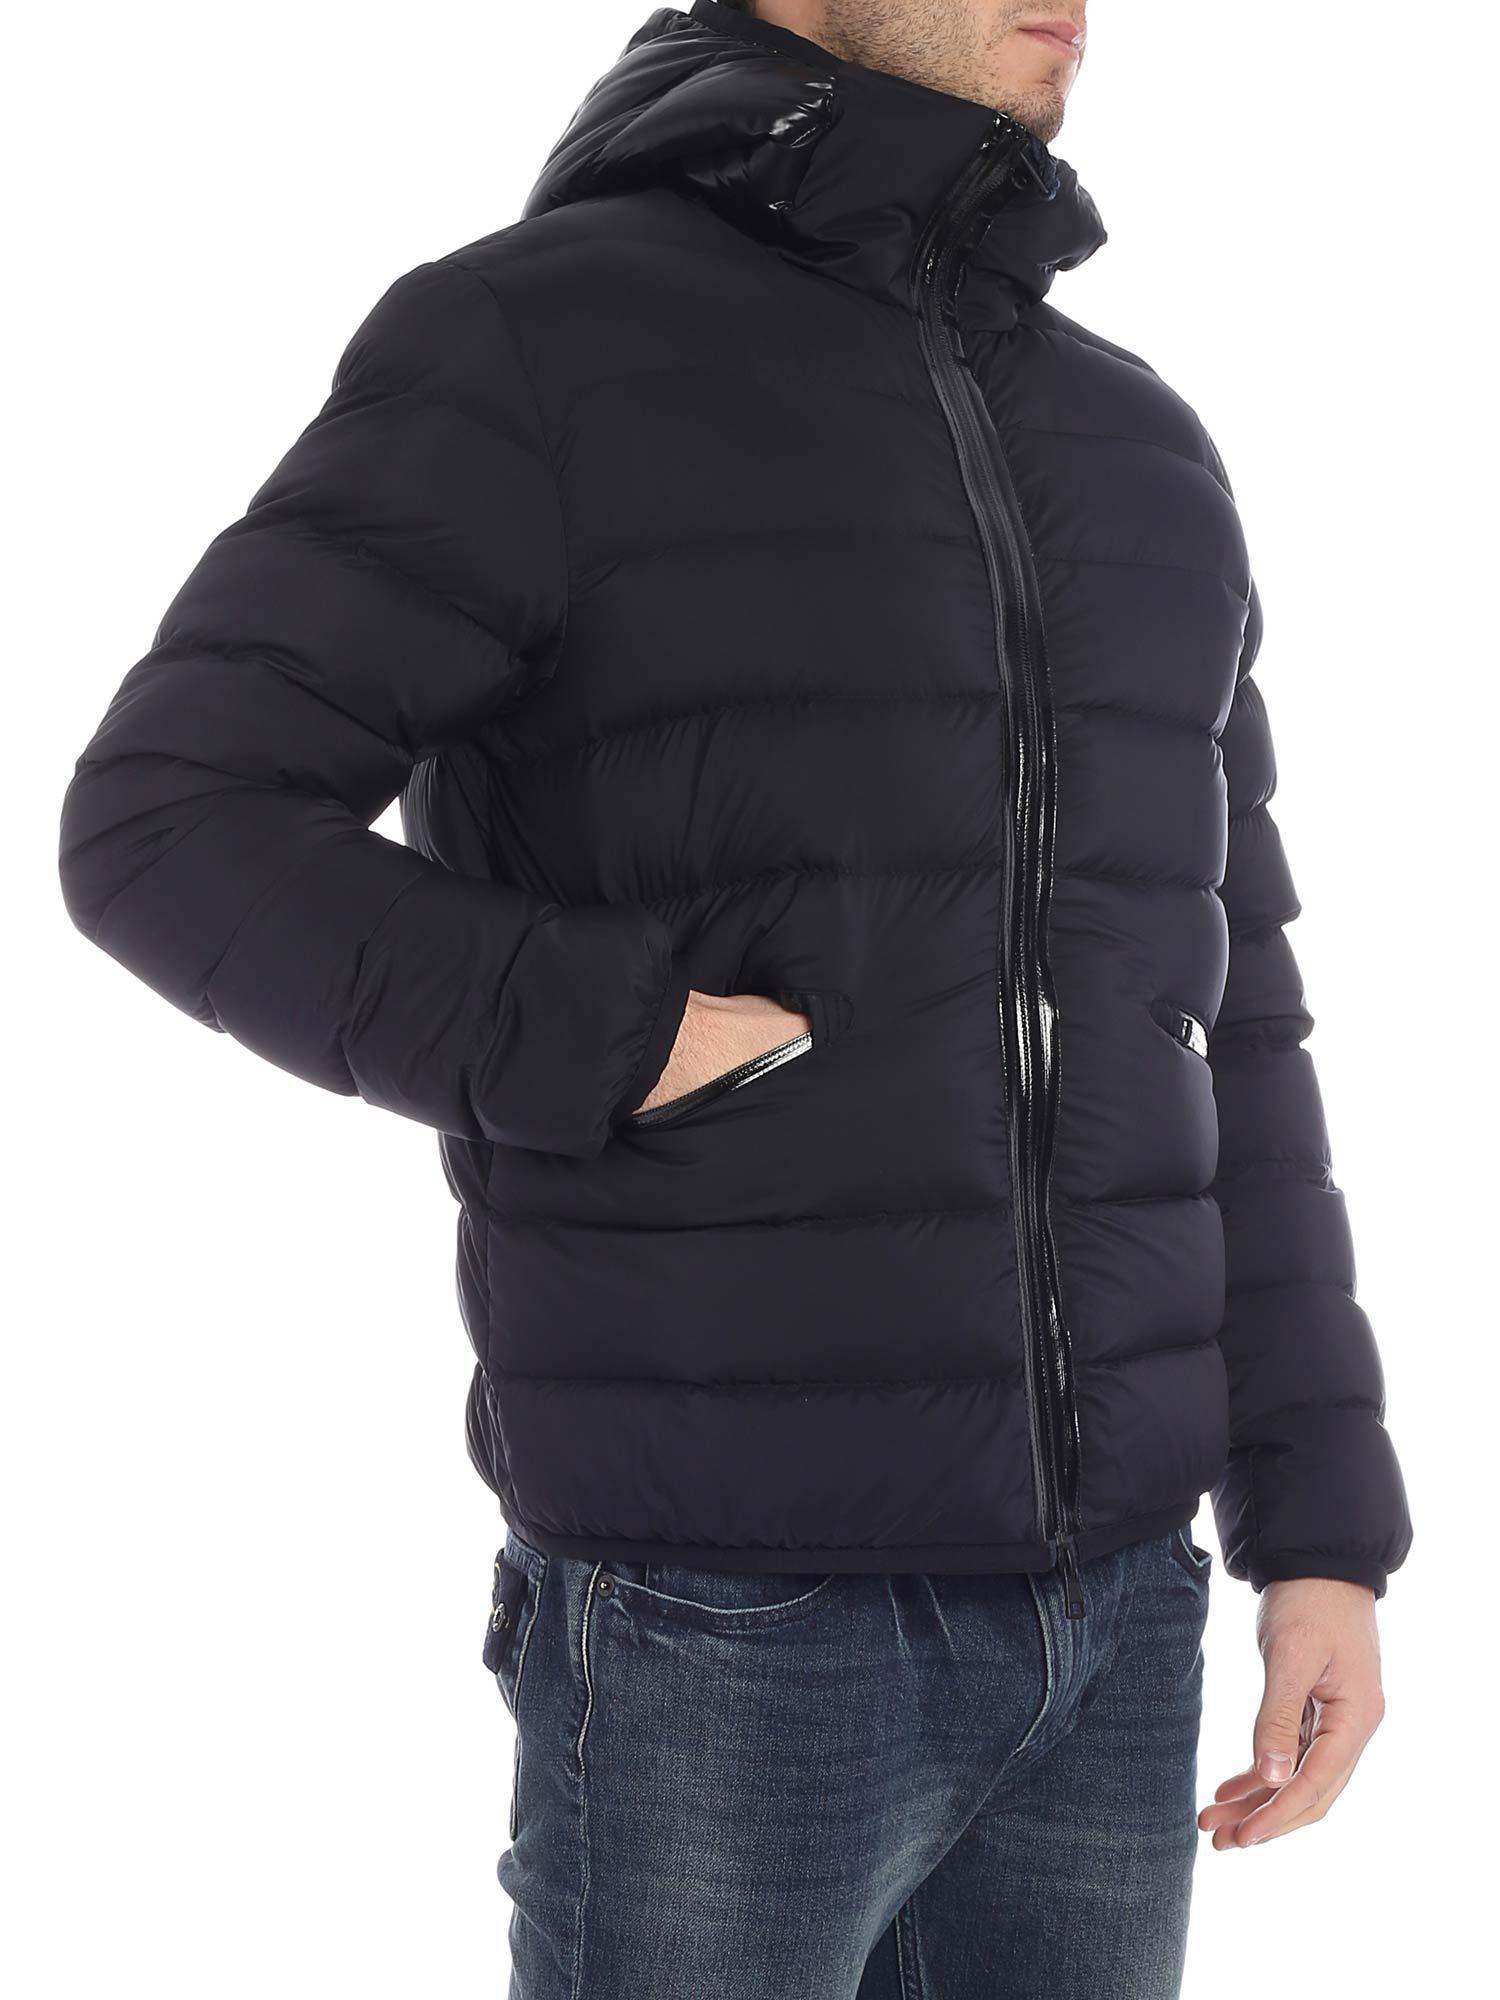 Moncler Synthetic Achard Black Down Jacket for Men - Lyst